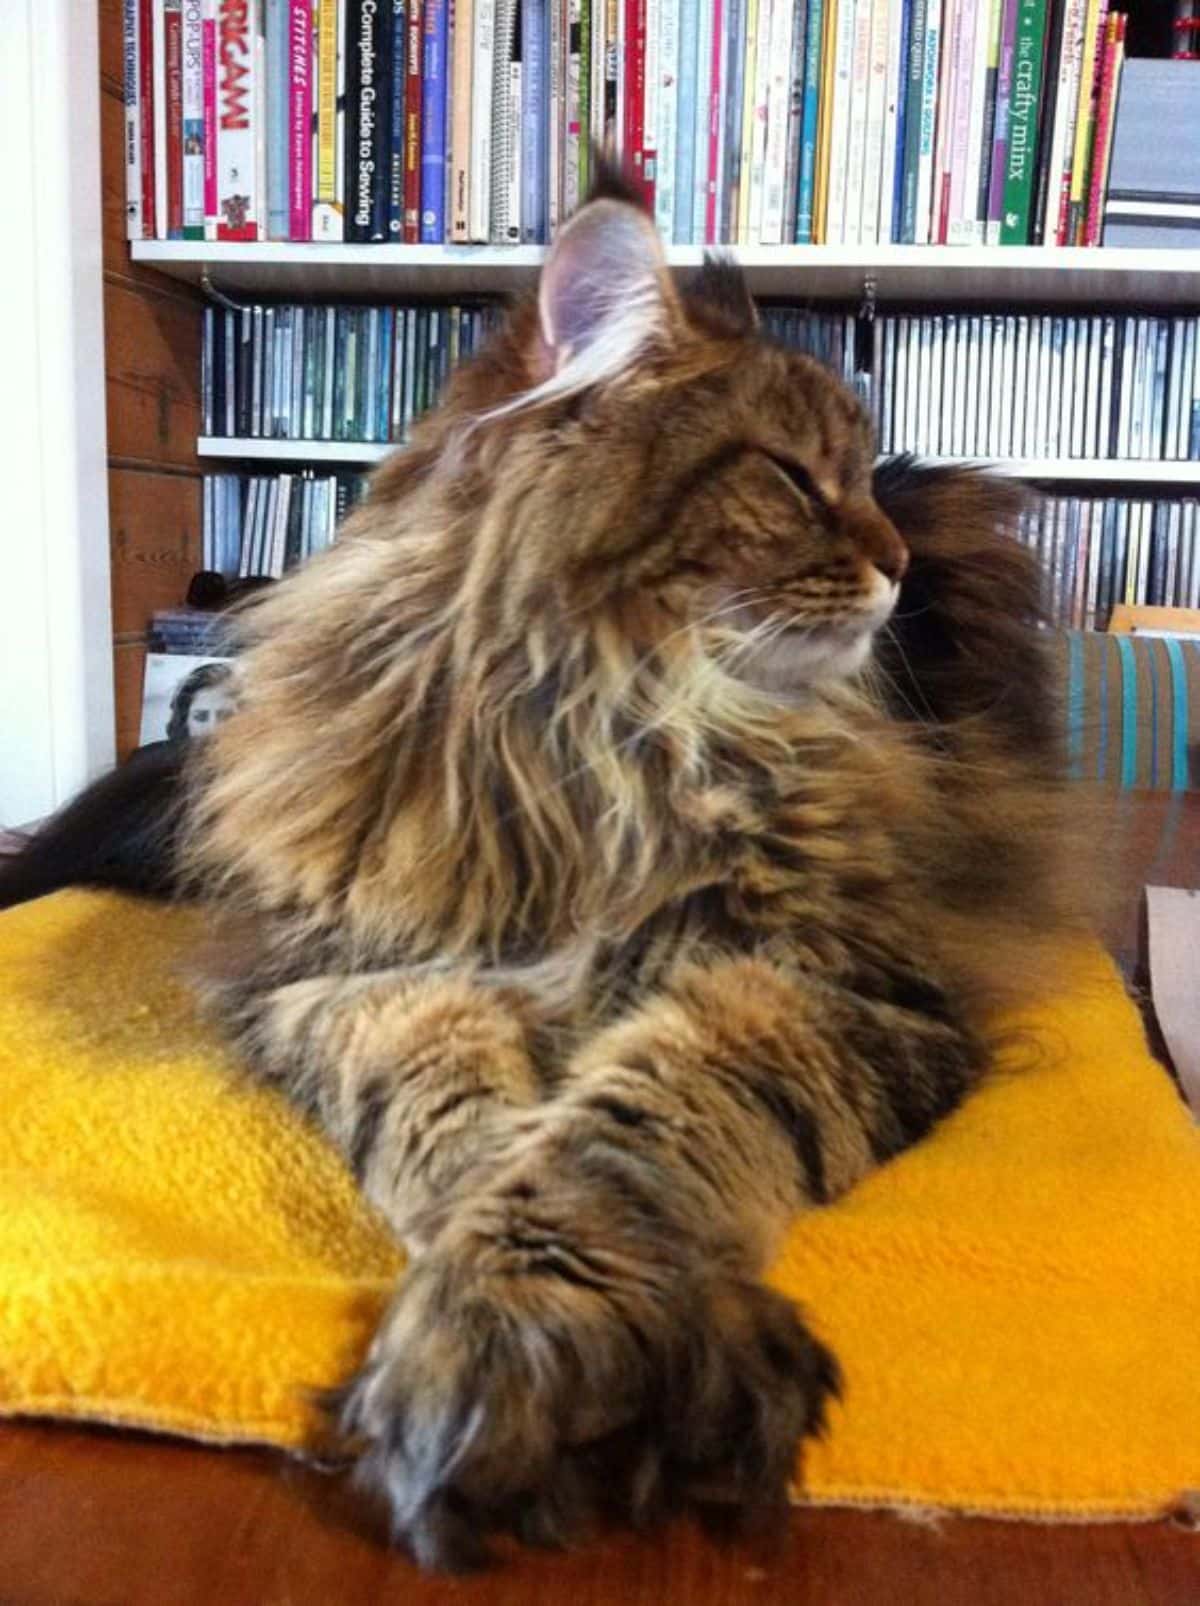 A fluffy tabby maine coon lying on a yellow blanket in a library.